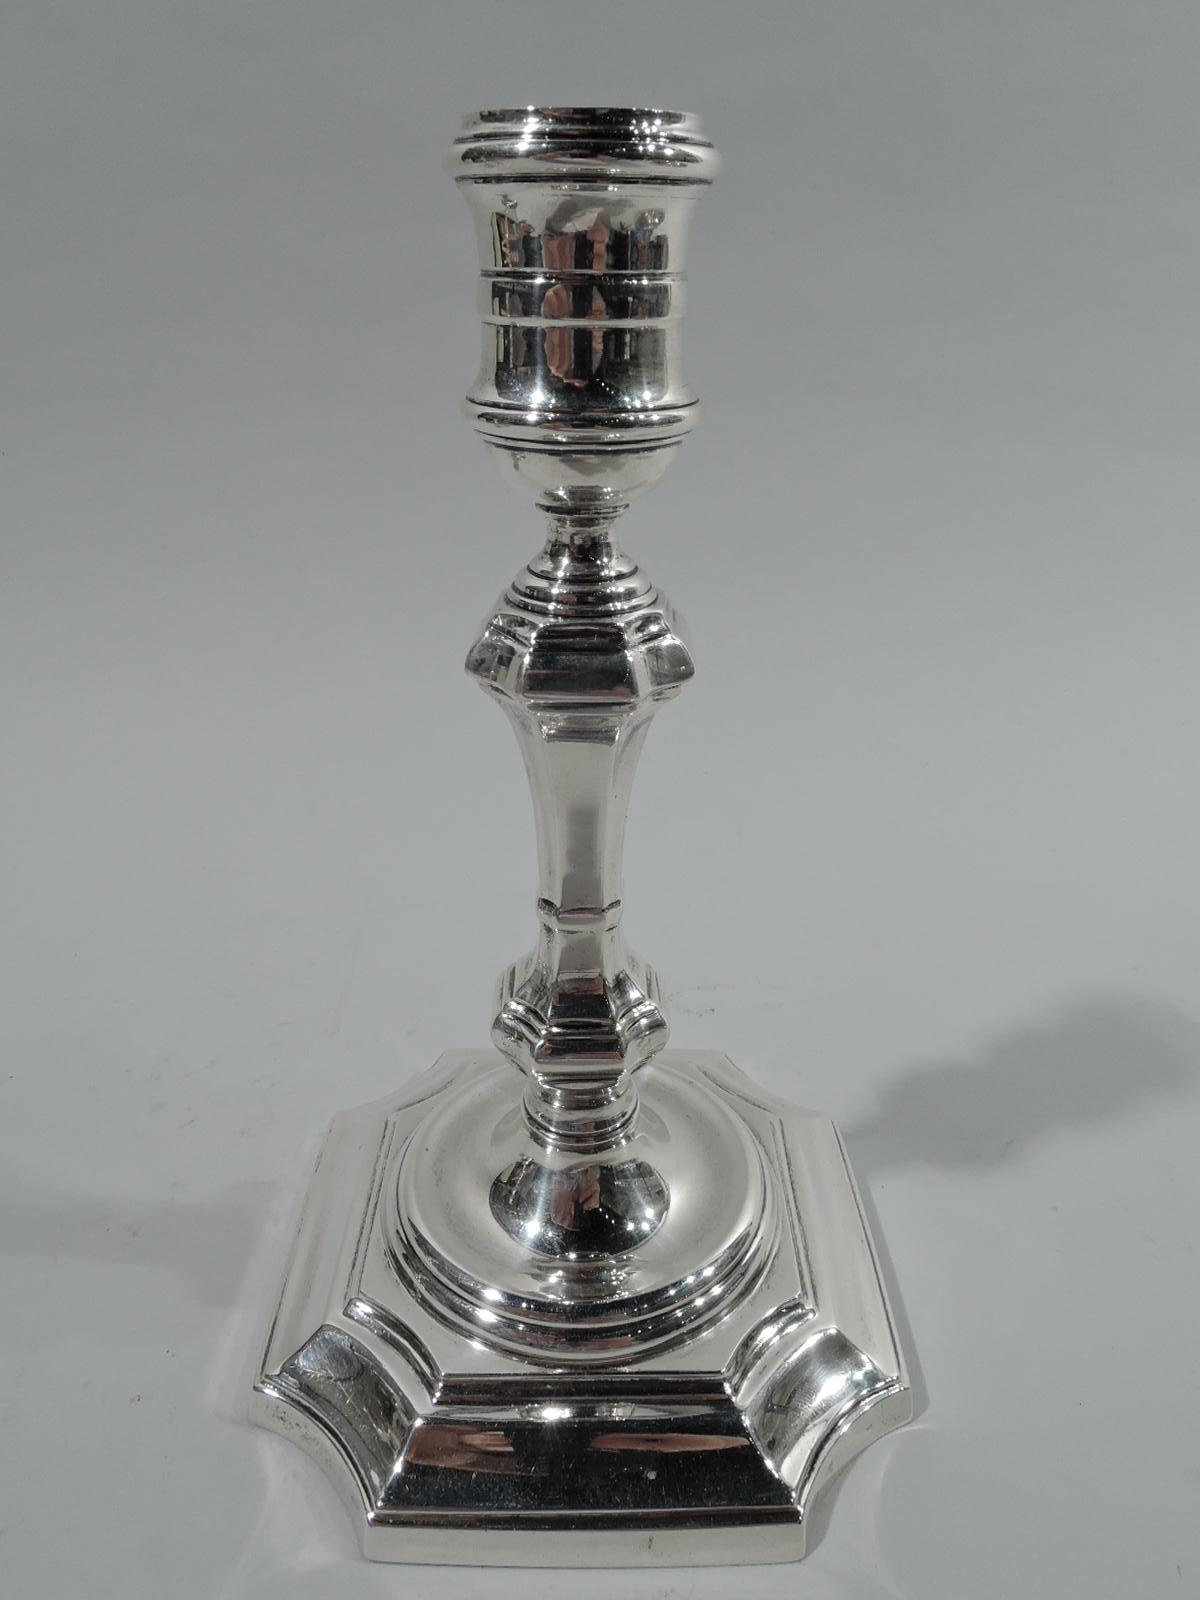 Pair of Georgian-style sterling silver candlesticks. Made by Currier & Roby in New York, ca 1920. Each: Girdles spool socket mounted to faceted and knopped pillar; concave square base with depressed round center. Traditional table lighting in